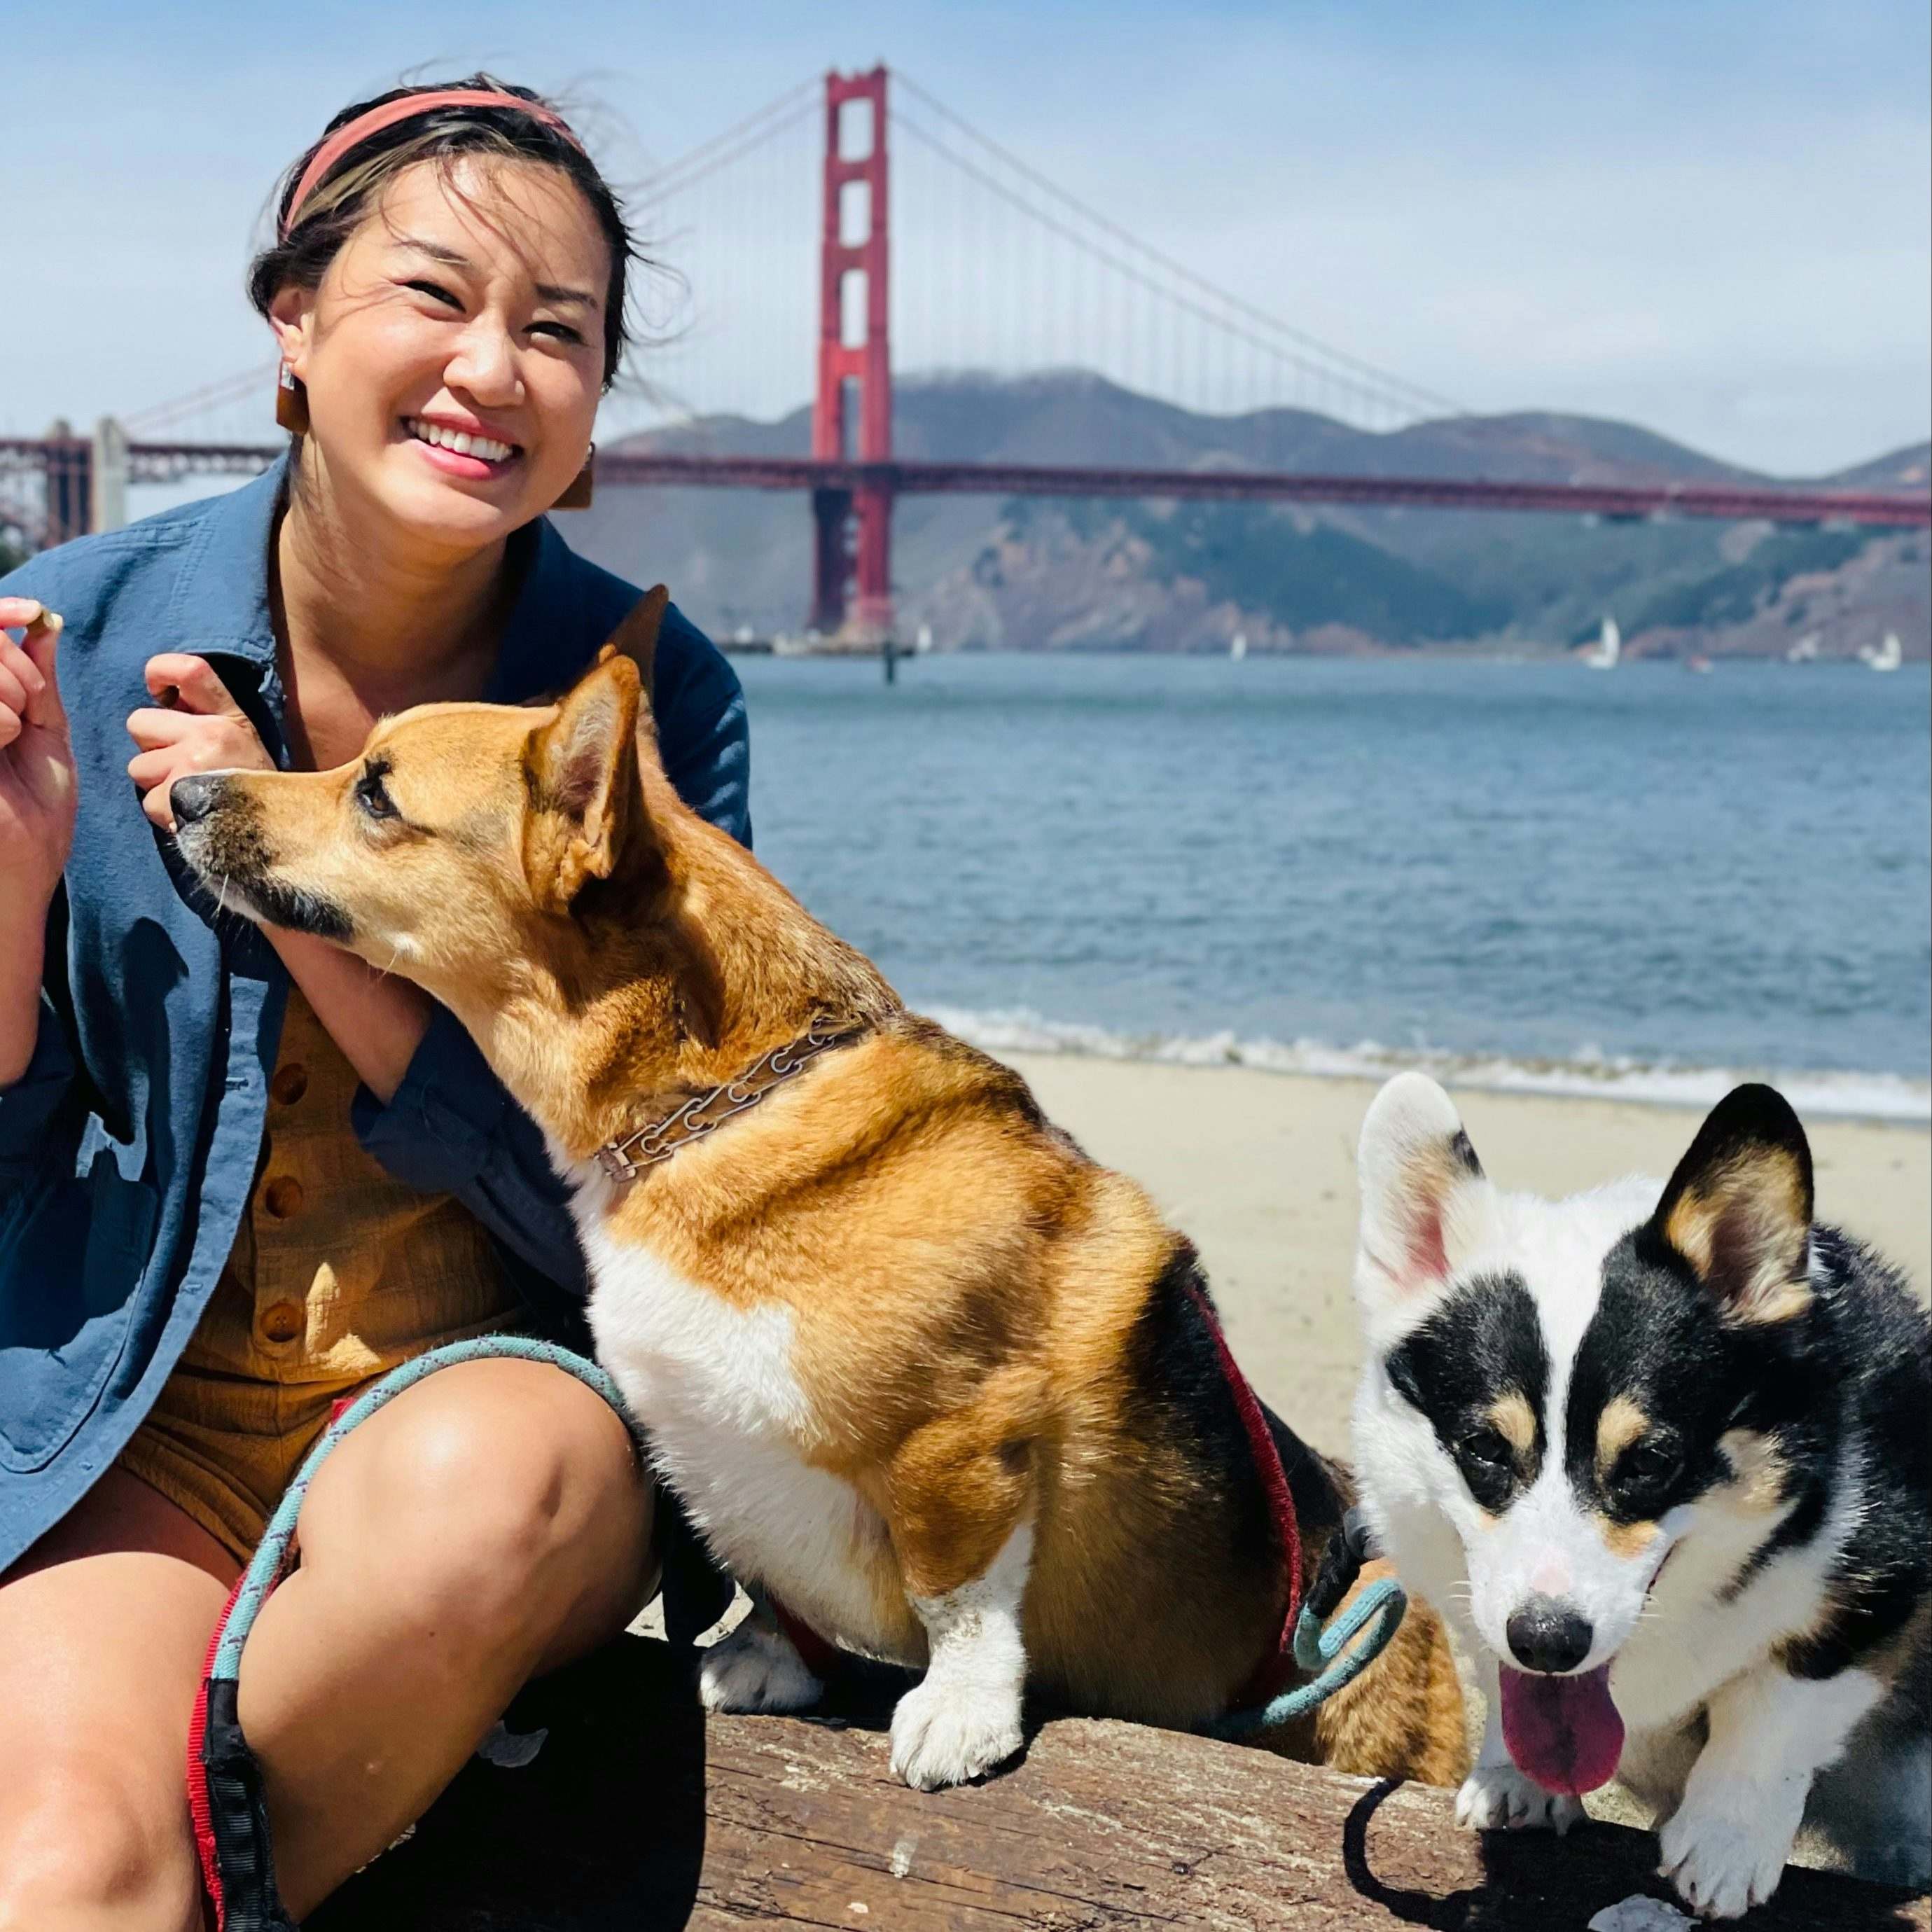 Travel advisor Sandi Lam Harder smiling in front of the Golden Gate Bridge with two dogs.